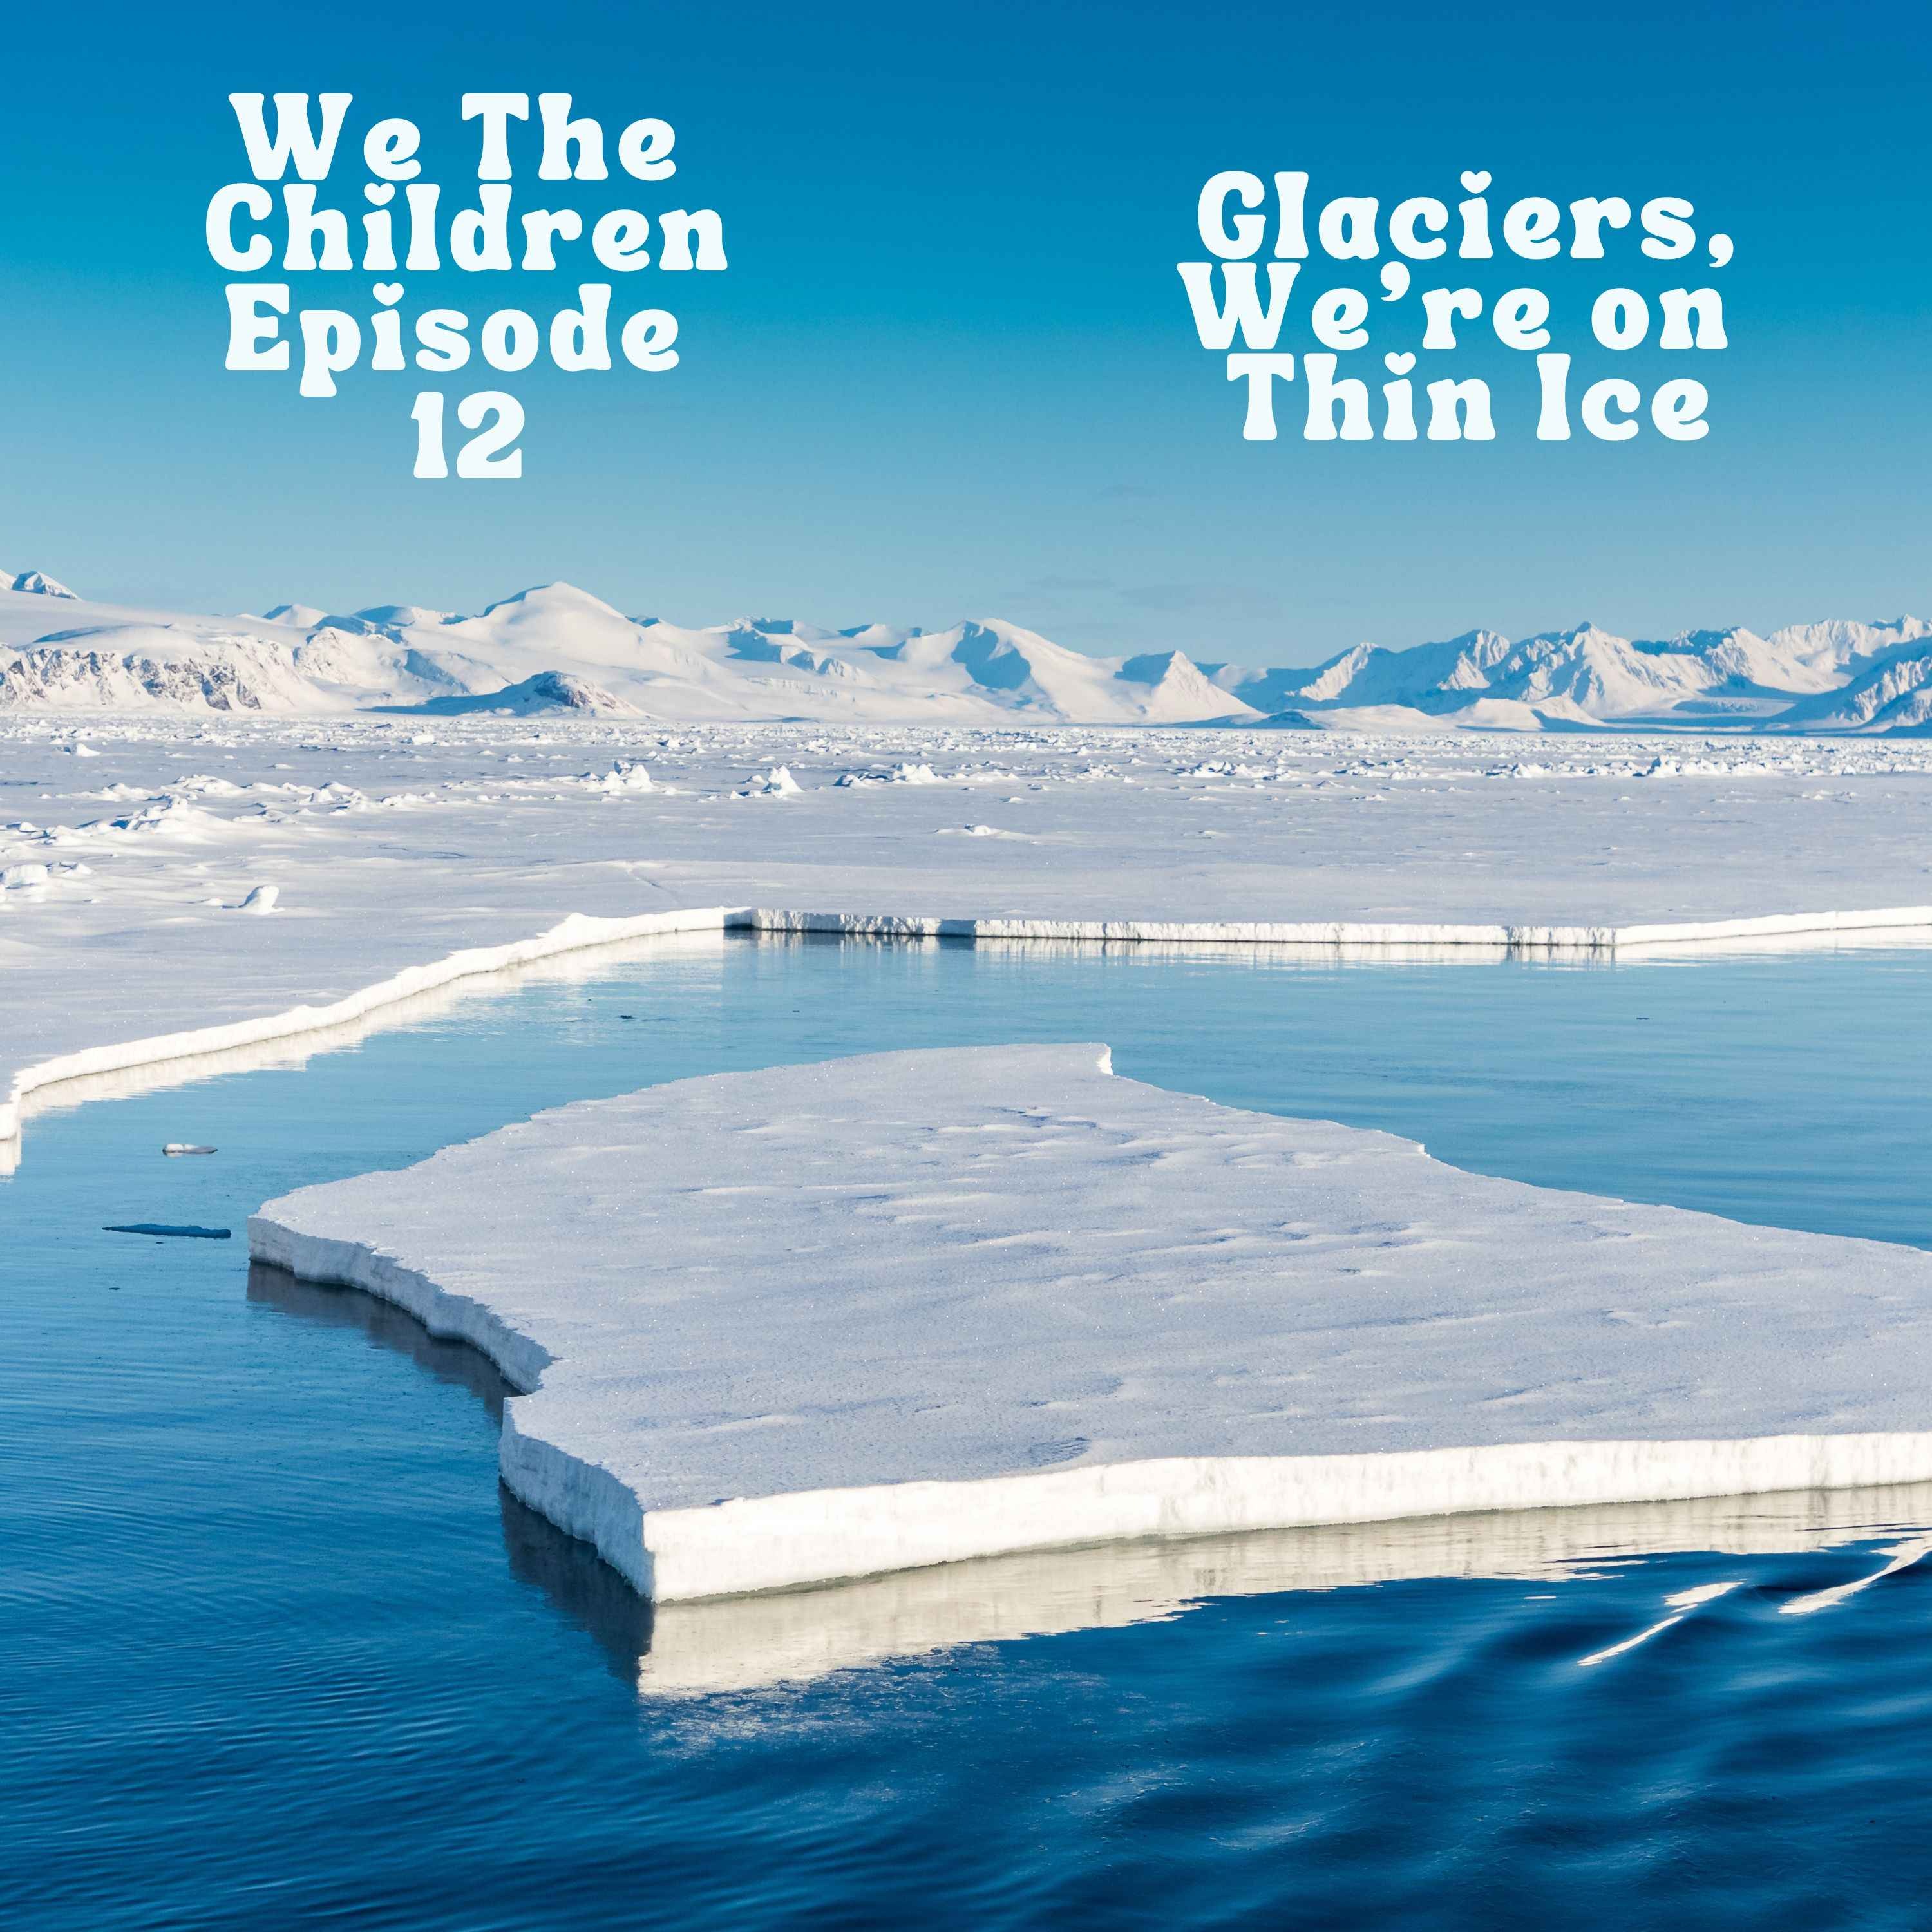 We The Children - Glaciers, We're on Thin Ice